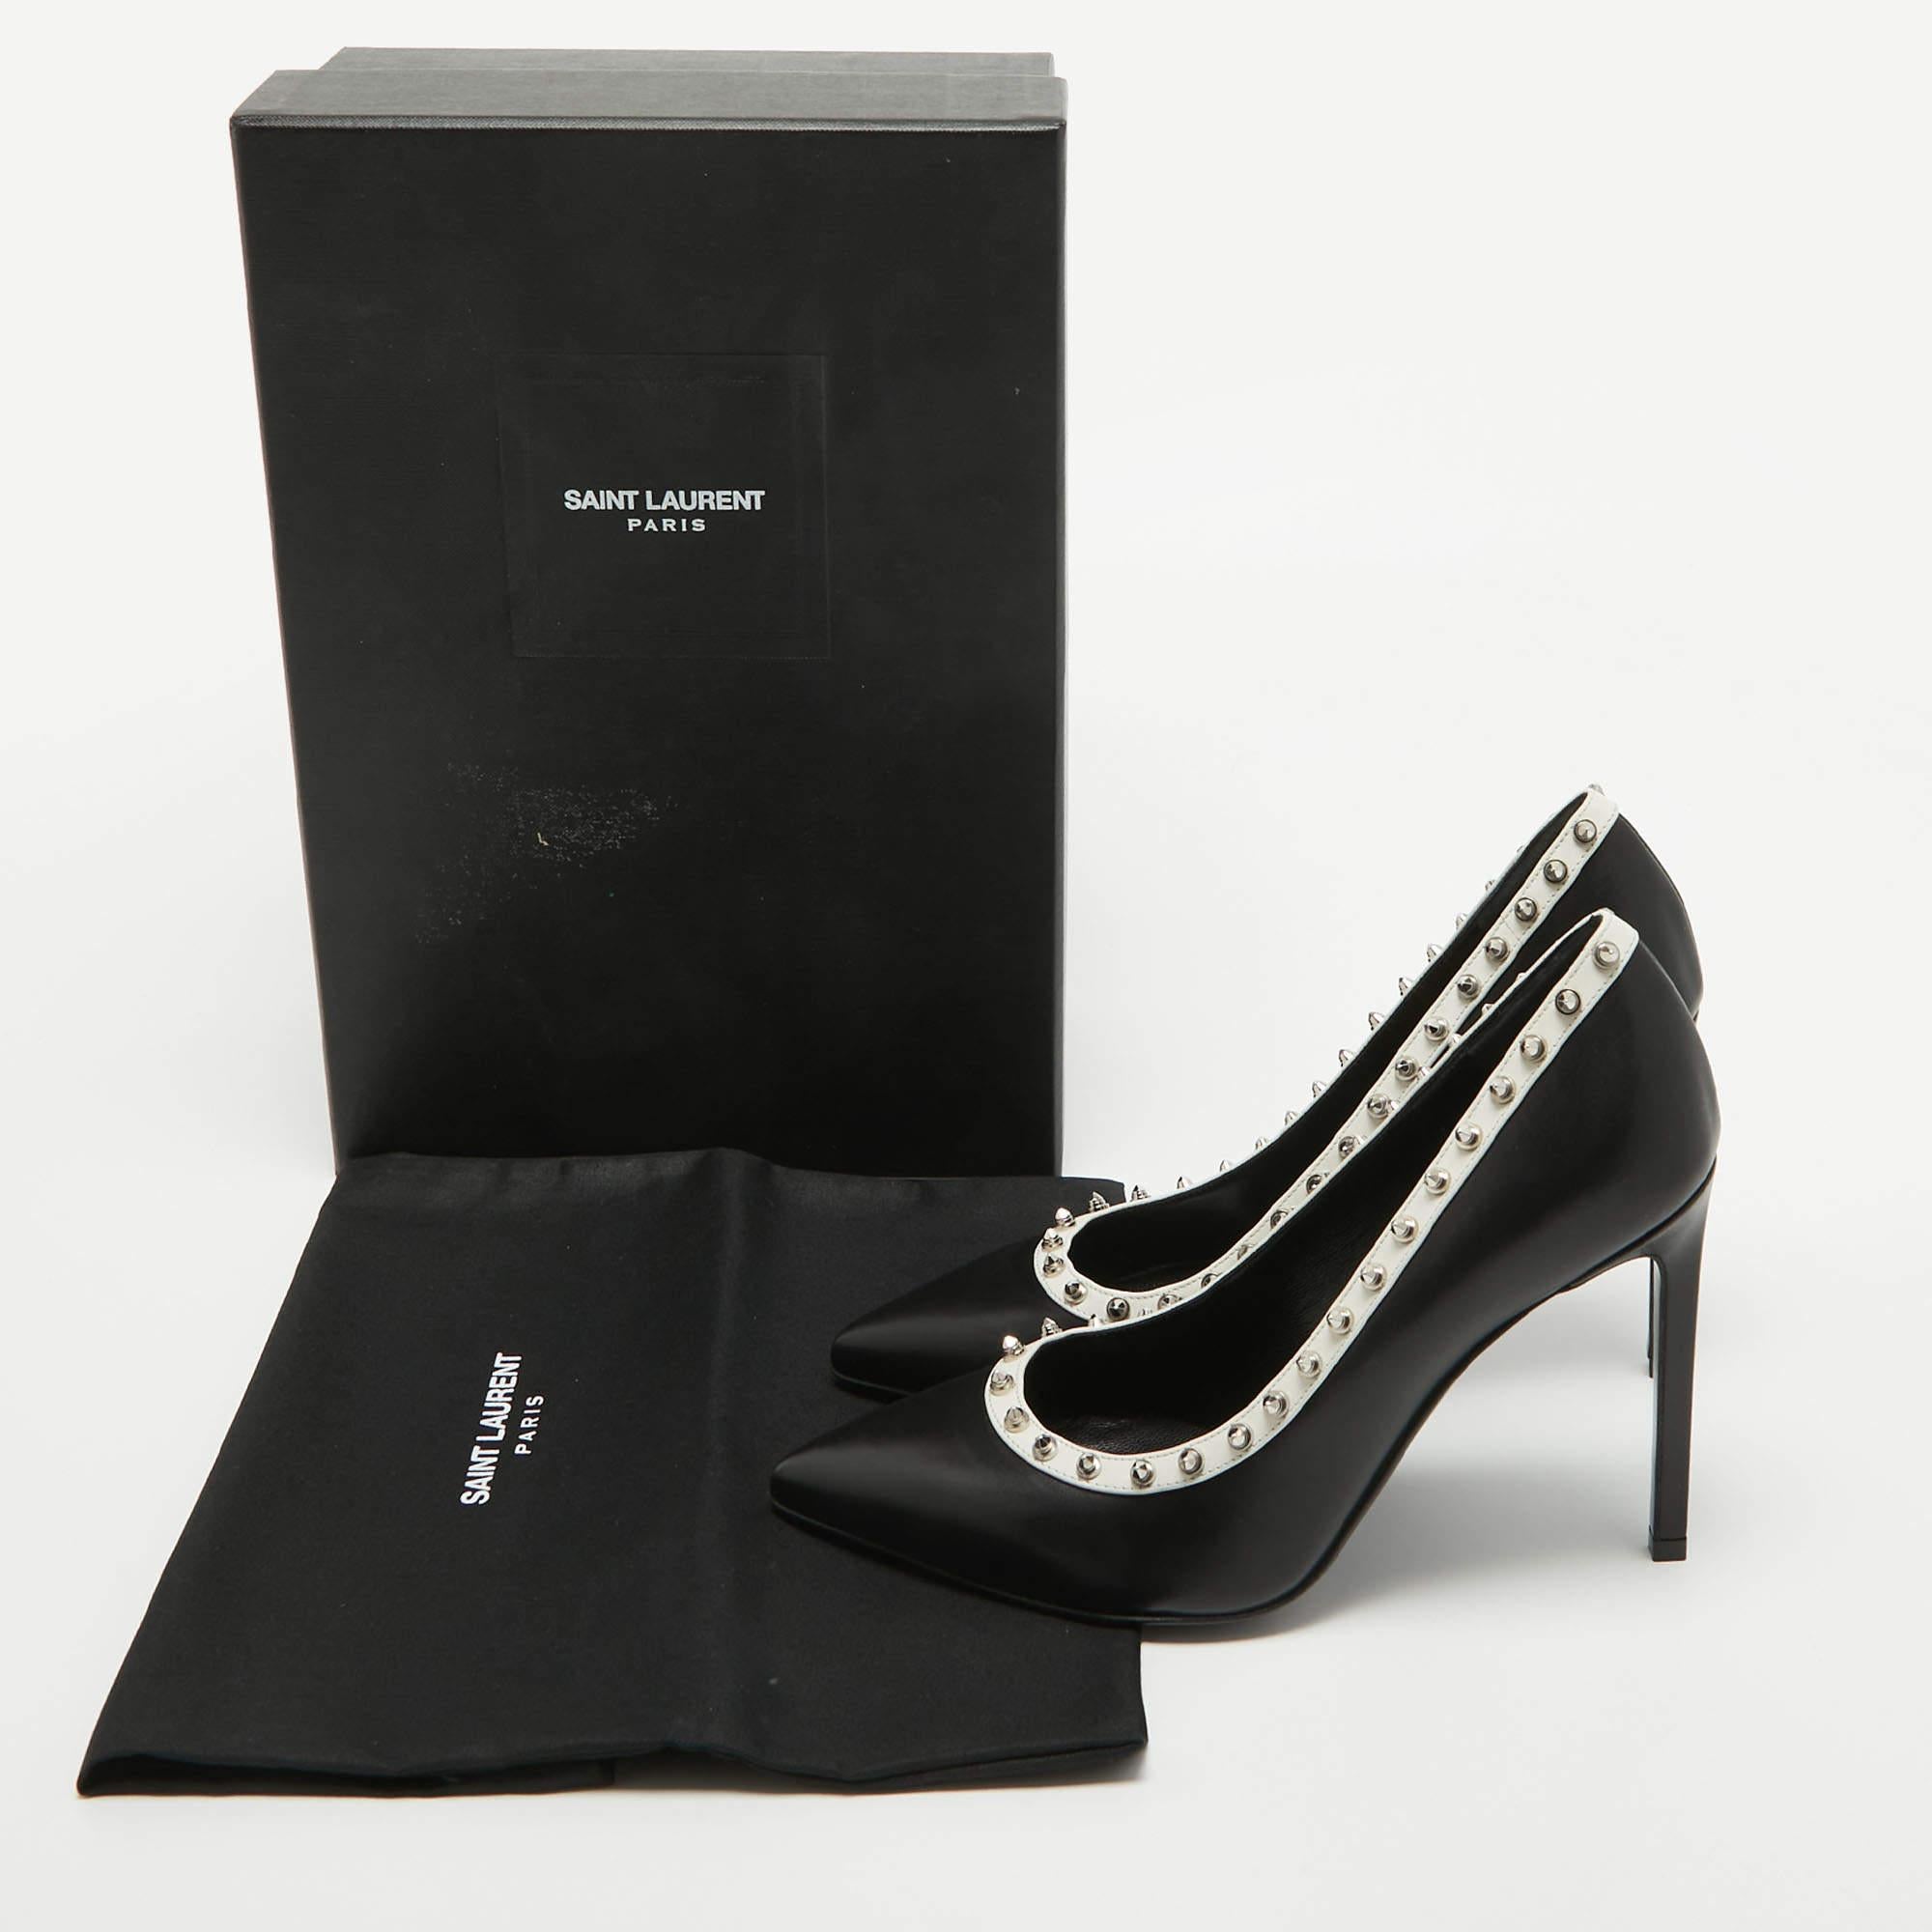 Saint Laurent Black/White Leather Studded Pointed Toe Pumps Size 36 For Sale 5